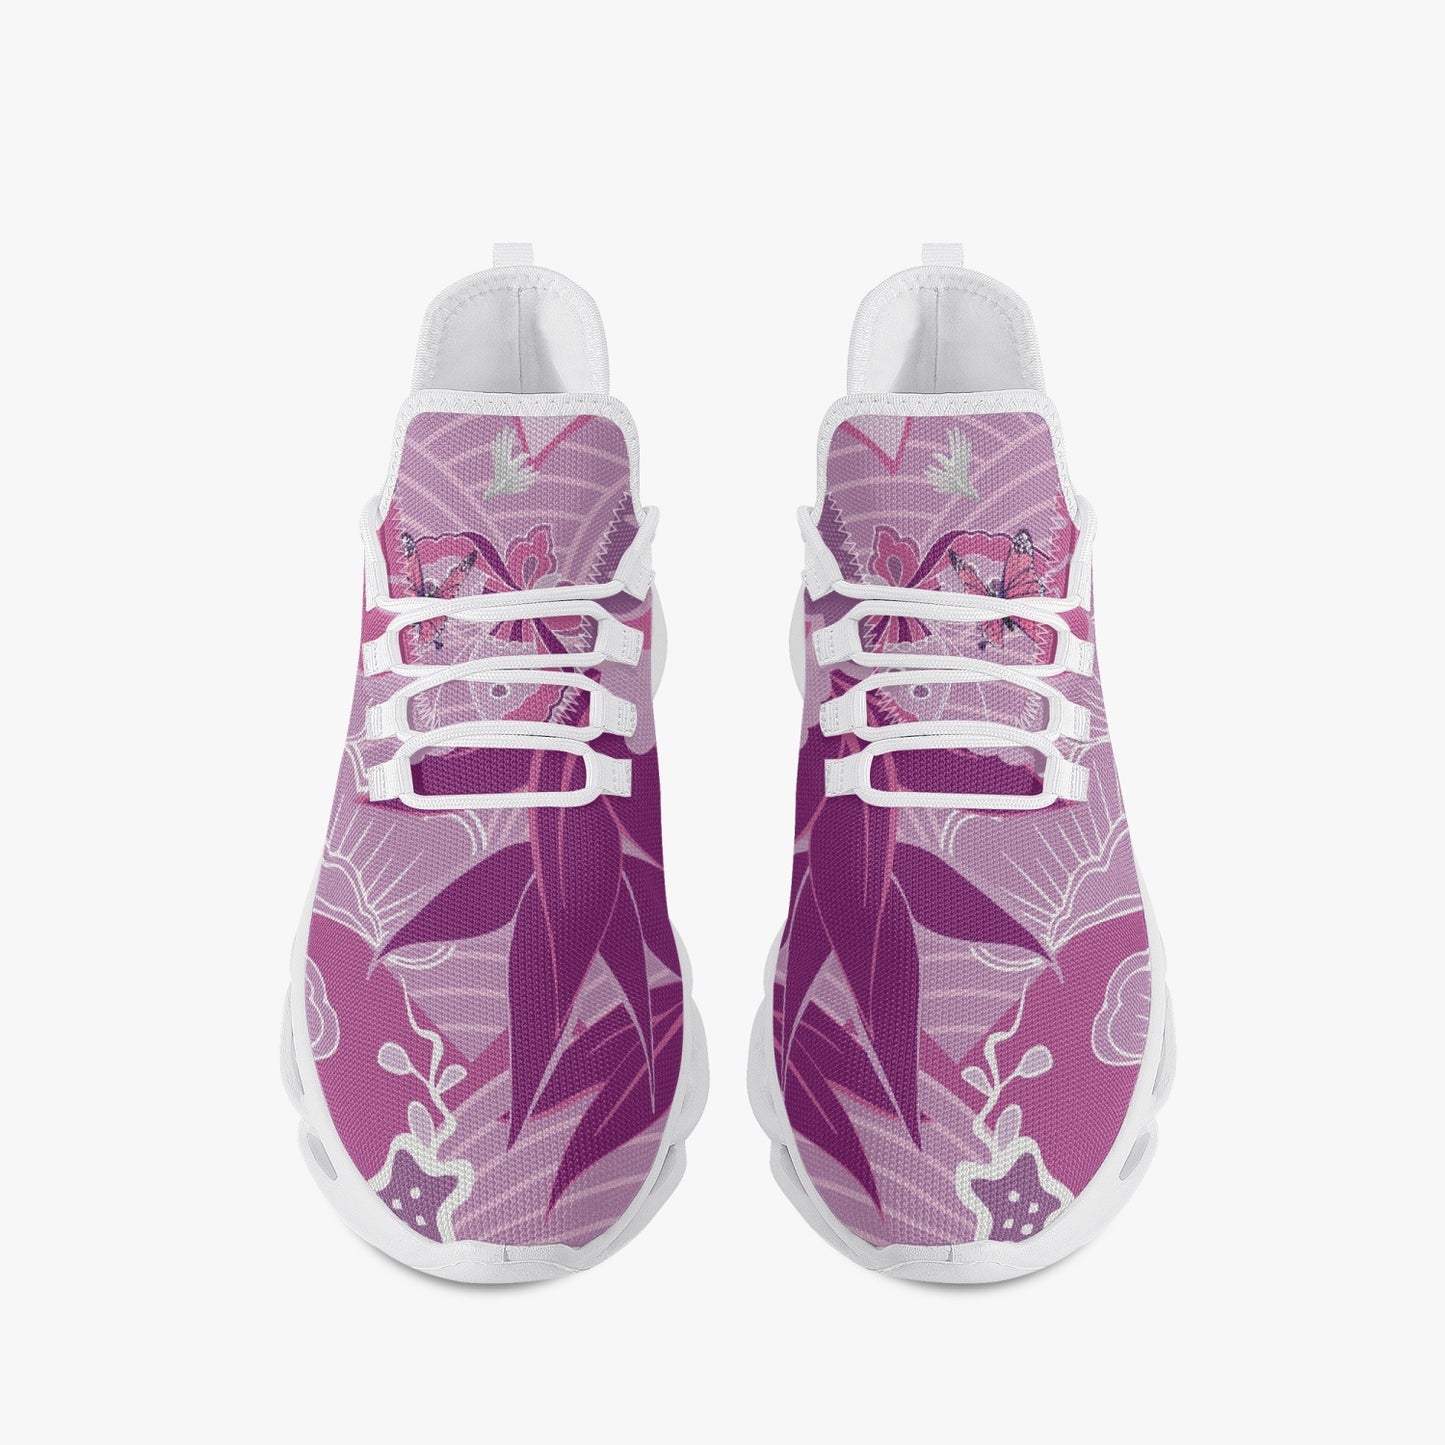 311. Bounce Mesh Knit Sneakers - Breast Cancer Warrior